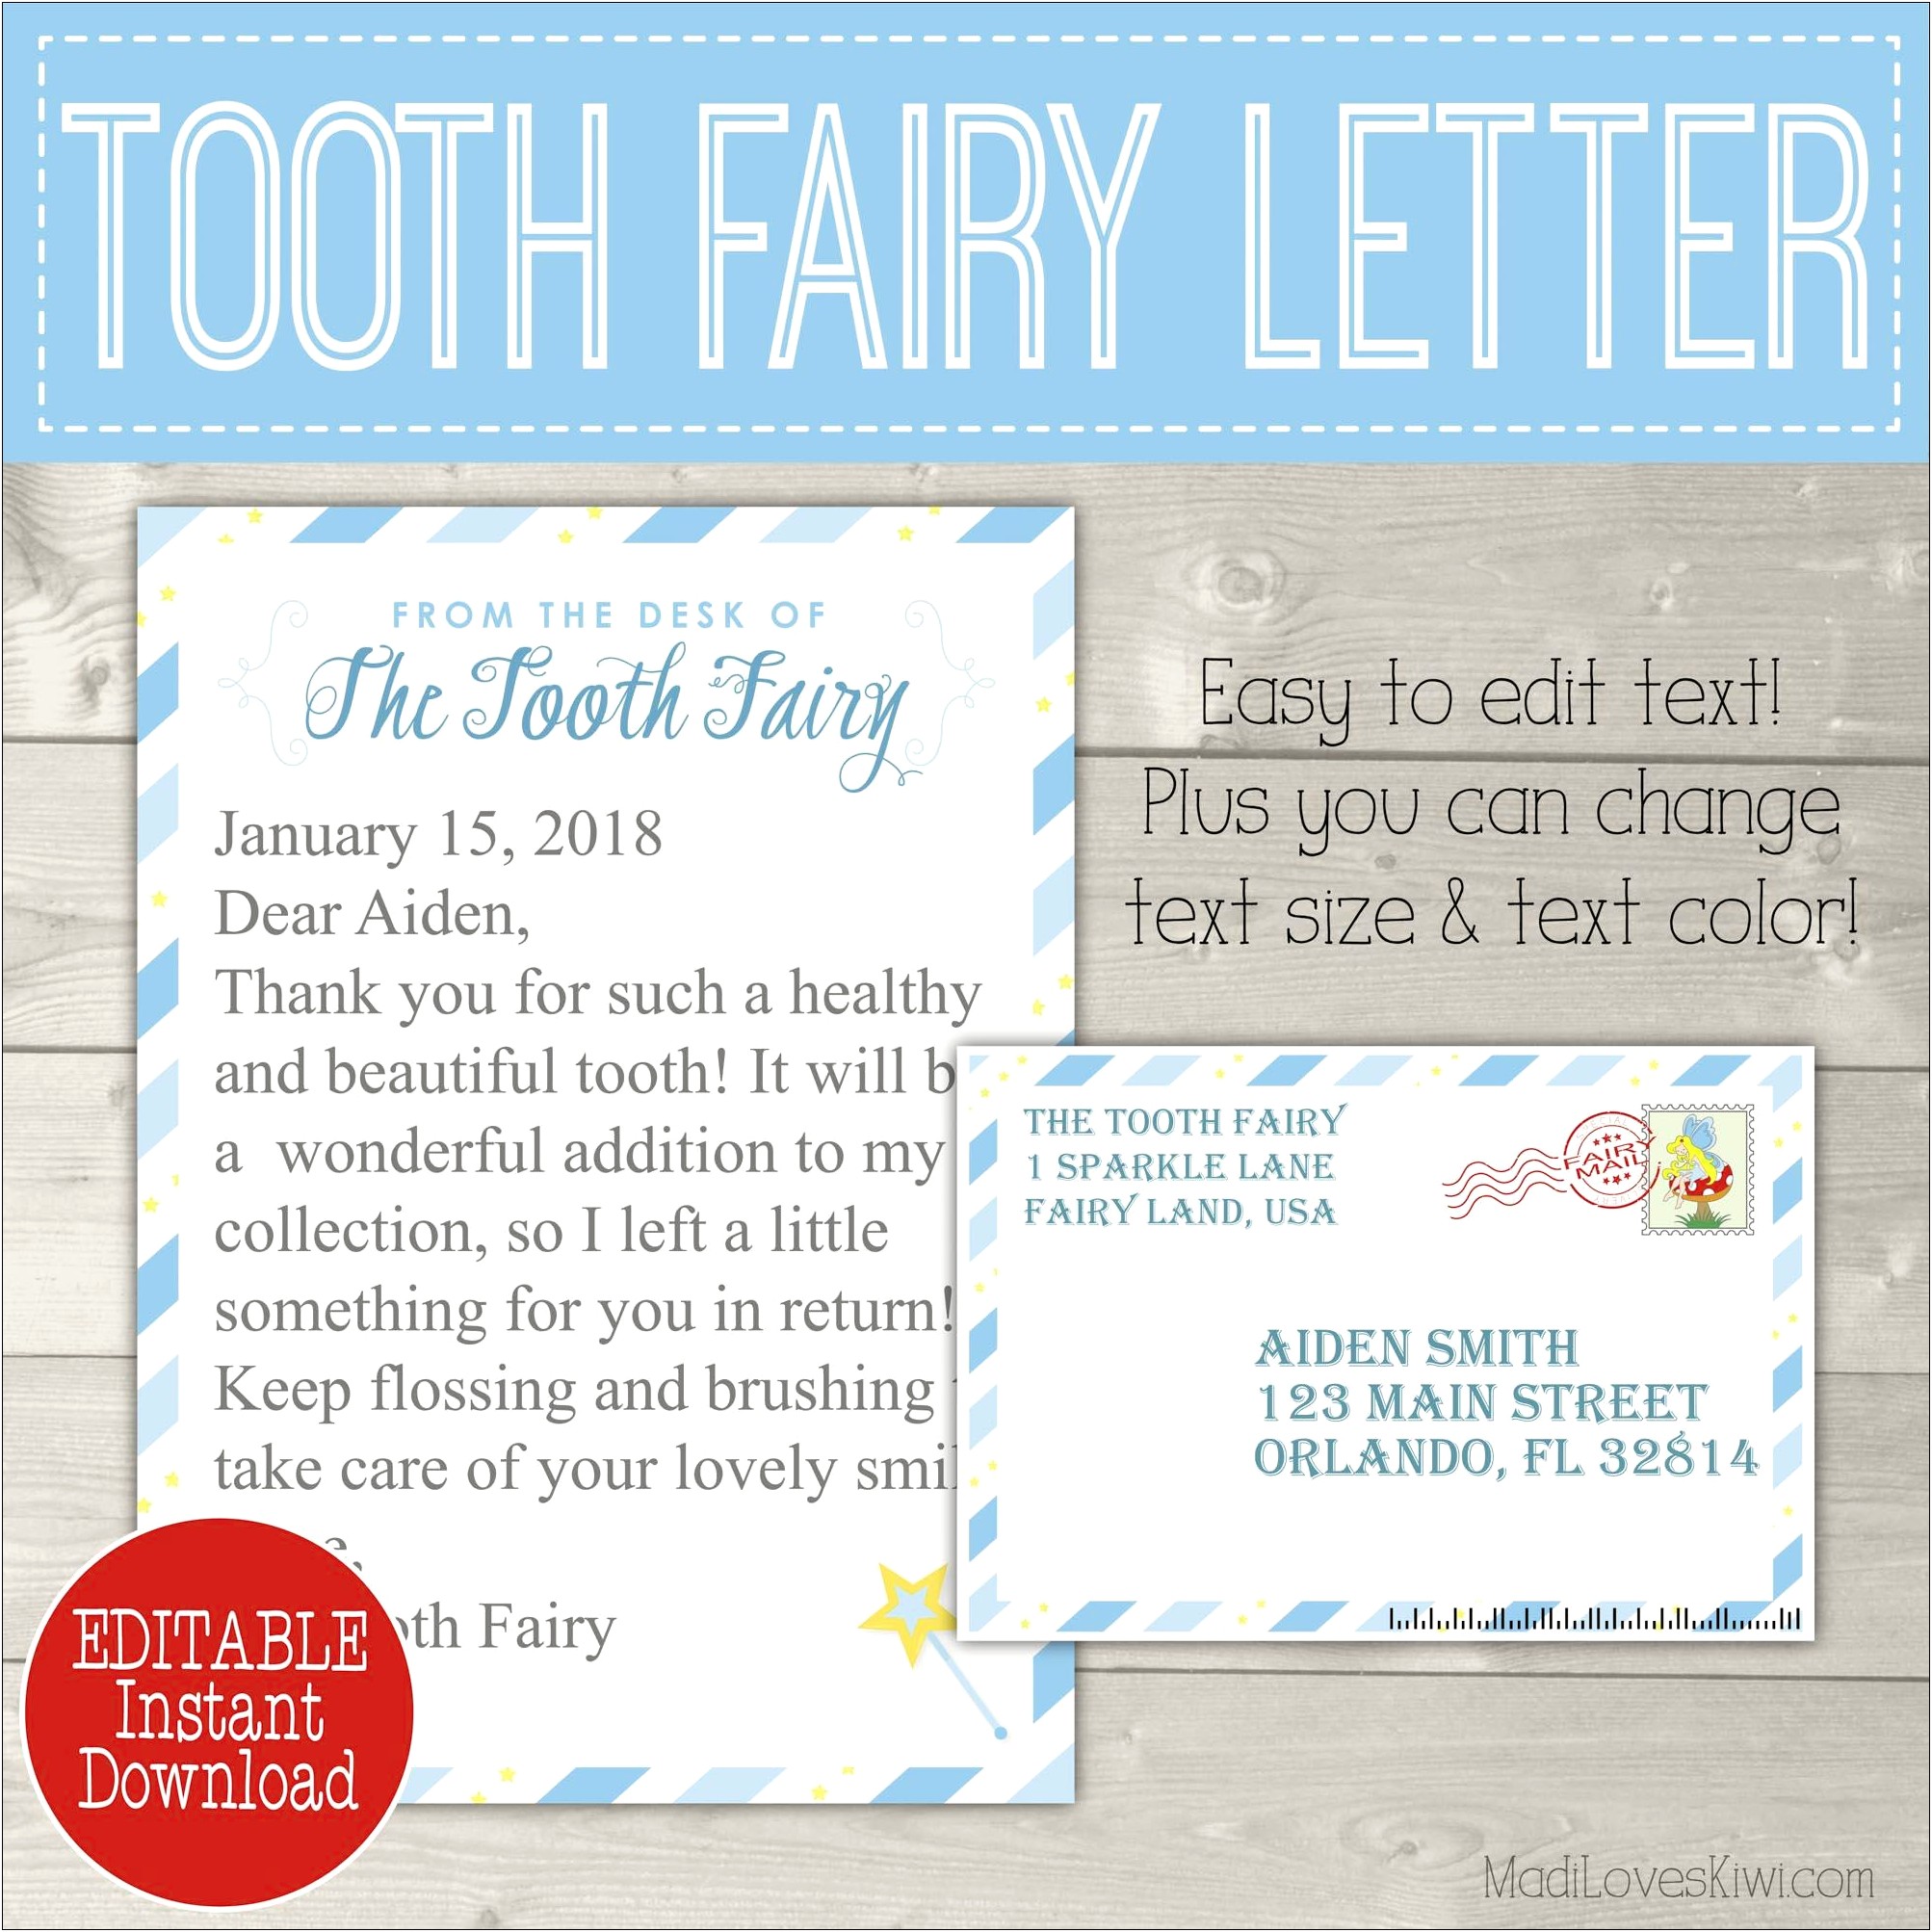 Free Tooth Fairy Letter Template Download